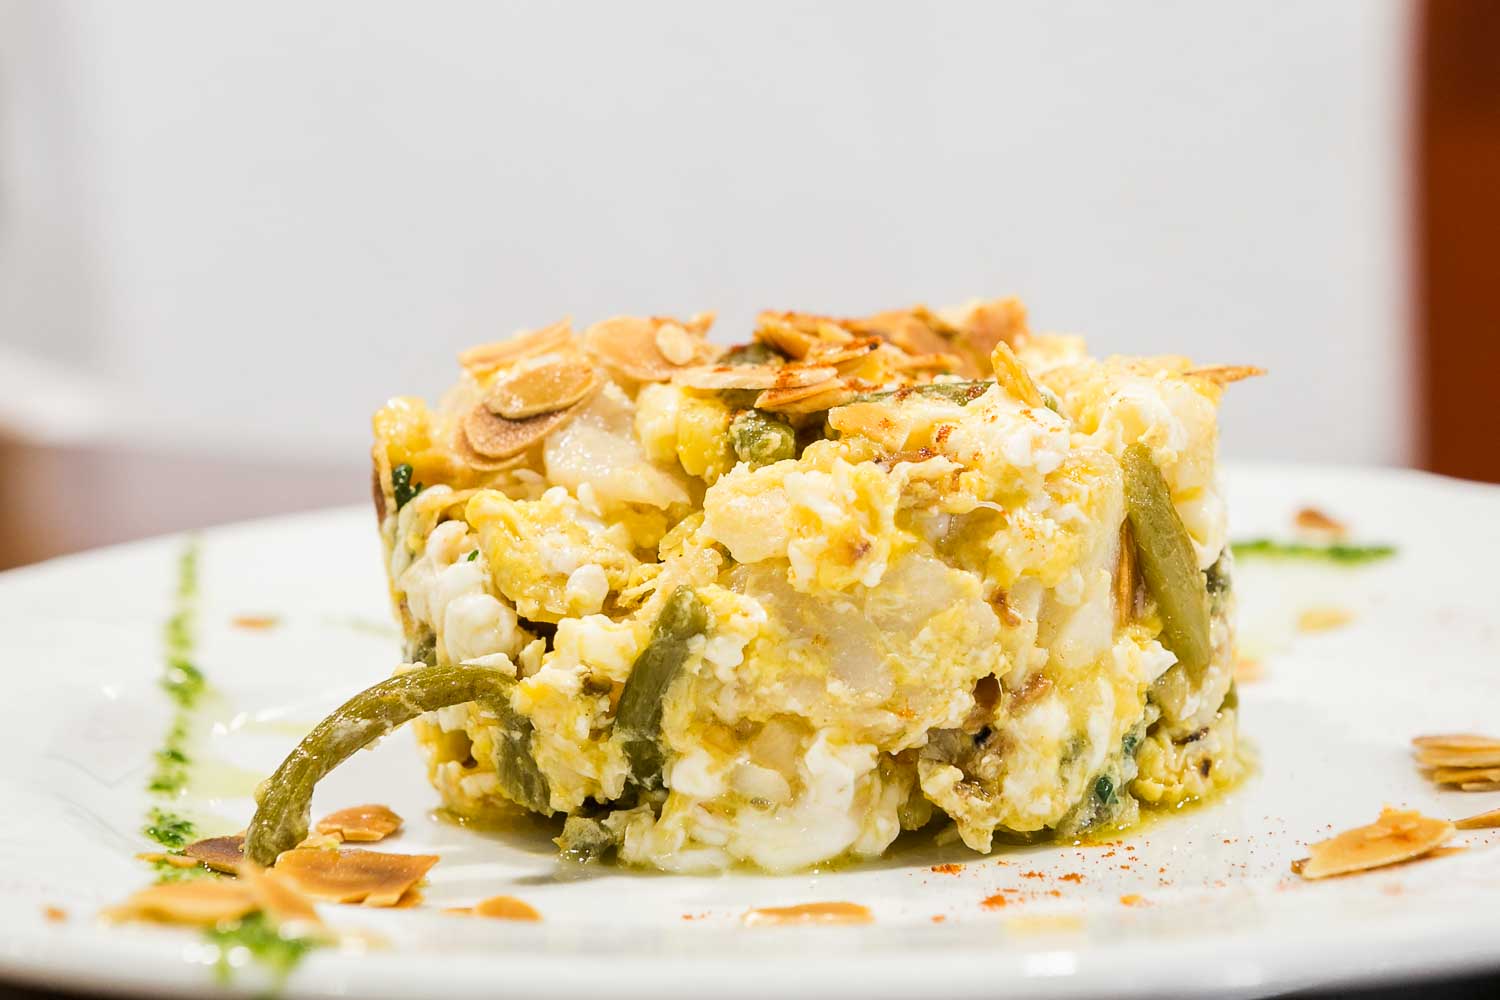 Scrambled eggs with tender garlic, cod and almonds